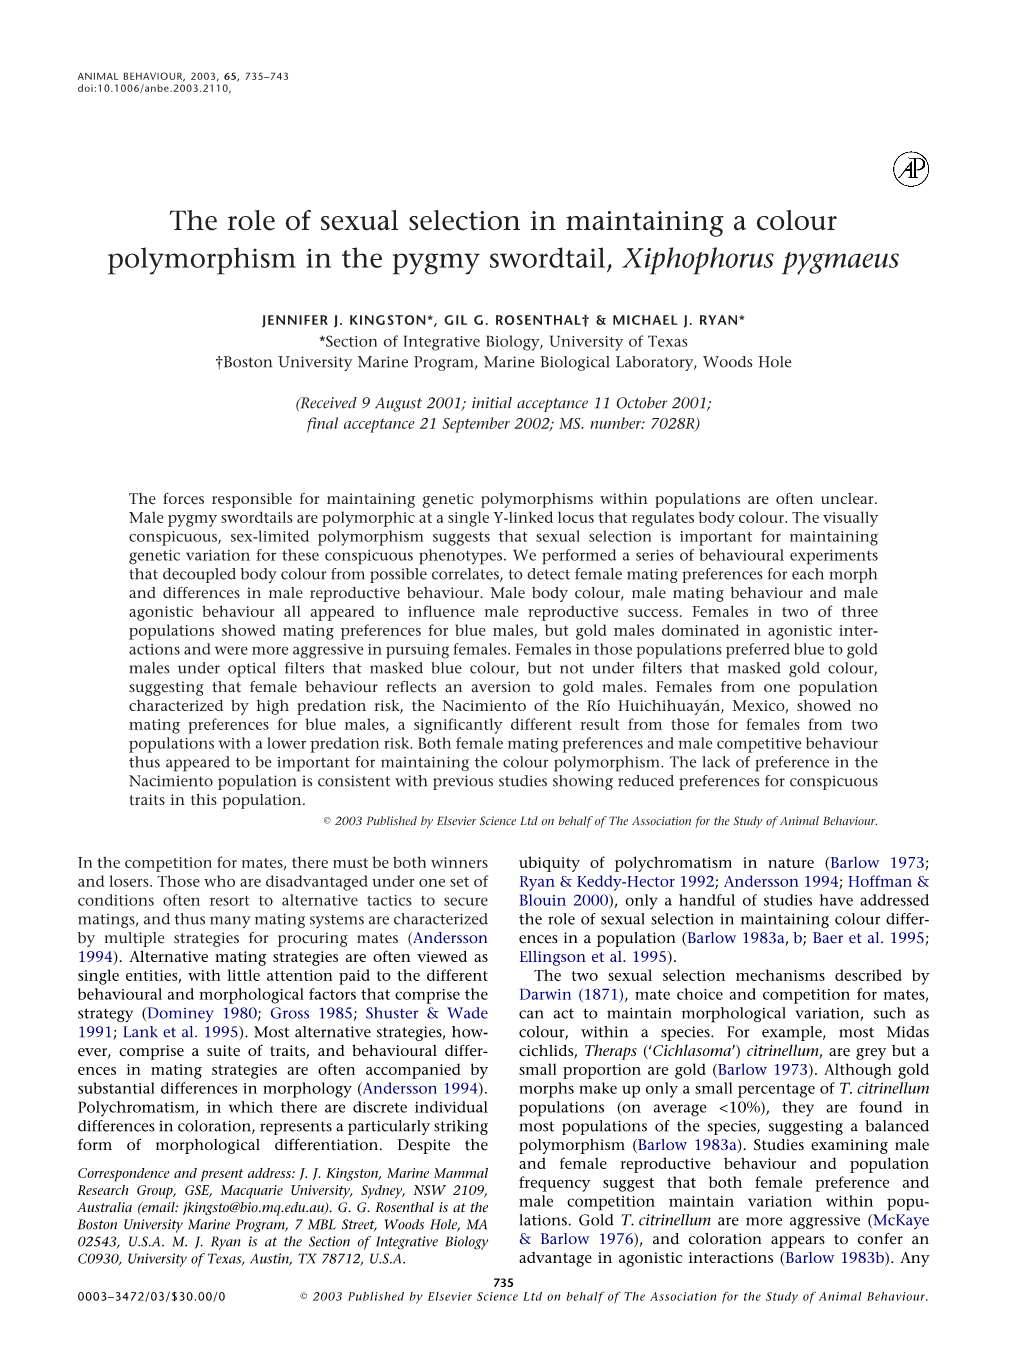 The Role of Sexual Selection in Maintaining a Colour Polymorphism in the Pygmy Swordtail, Xiphophorus Pygmaeus